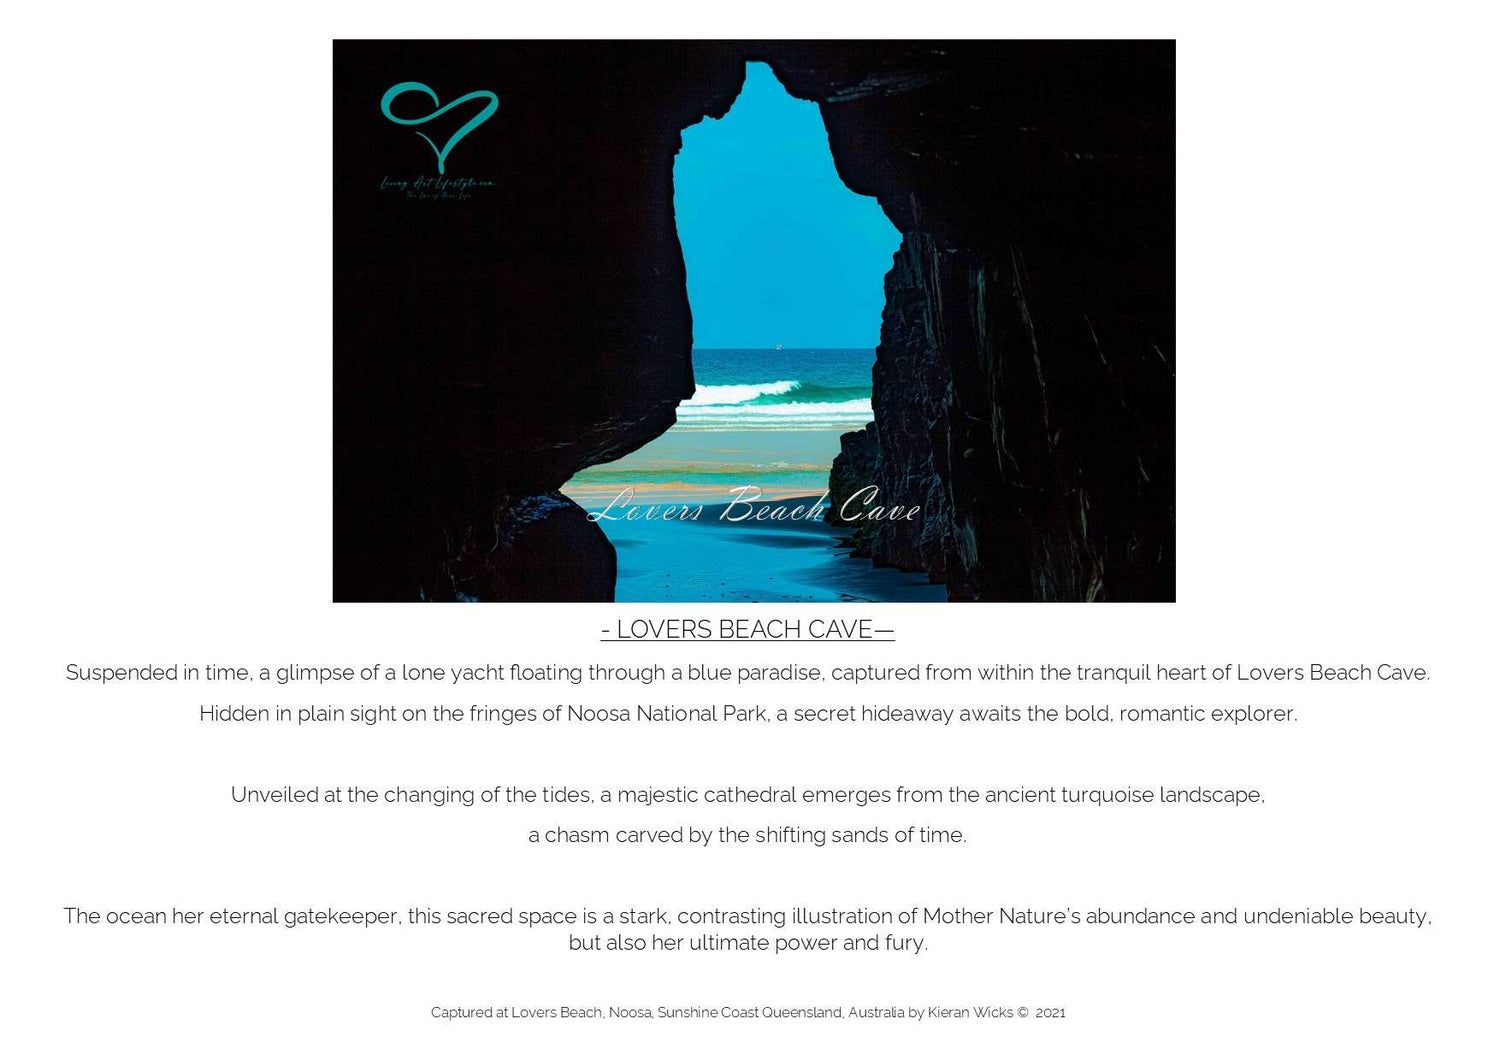 LOVERS BEACH CAVE COLLECTION